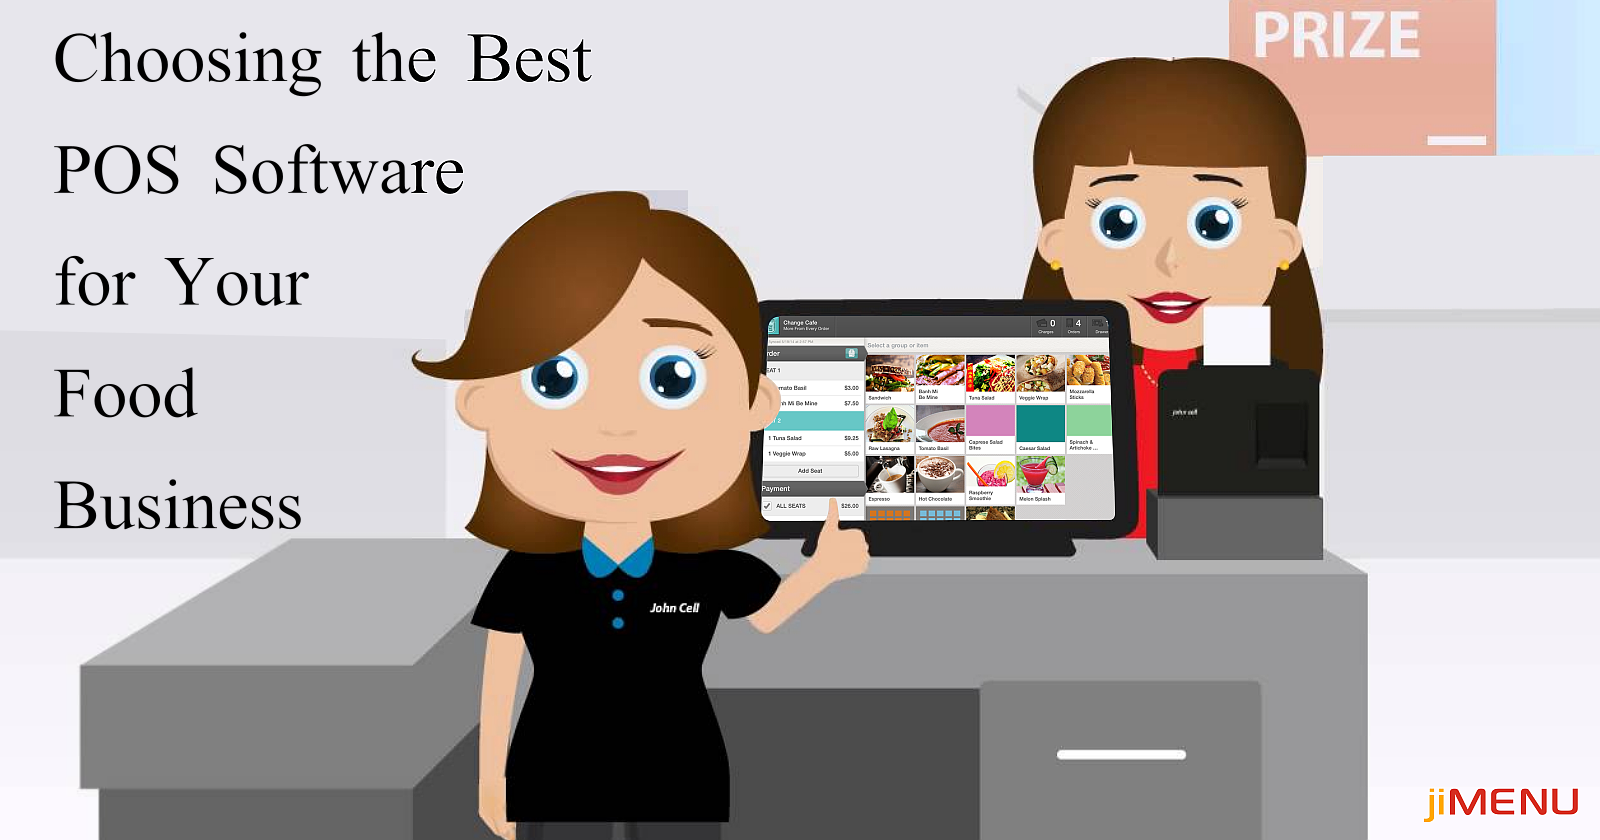 Choosing the Best POS Software for Your Food Business